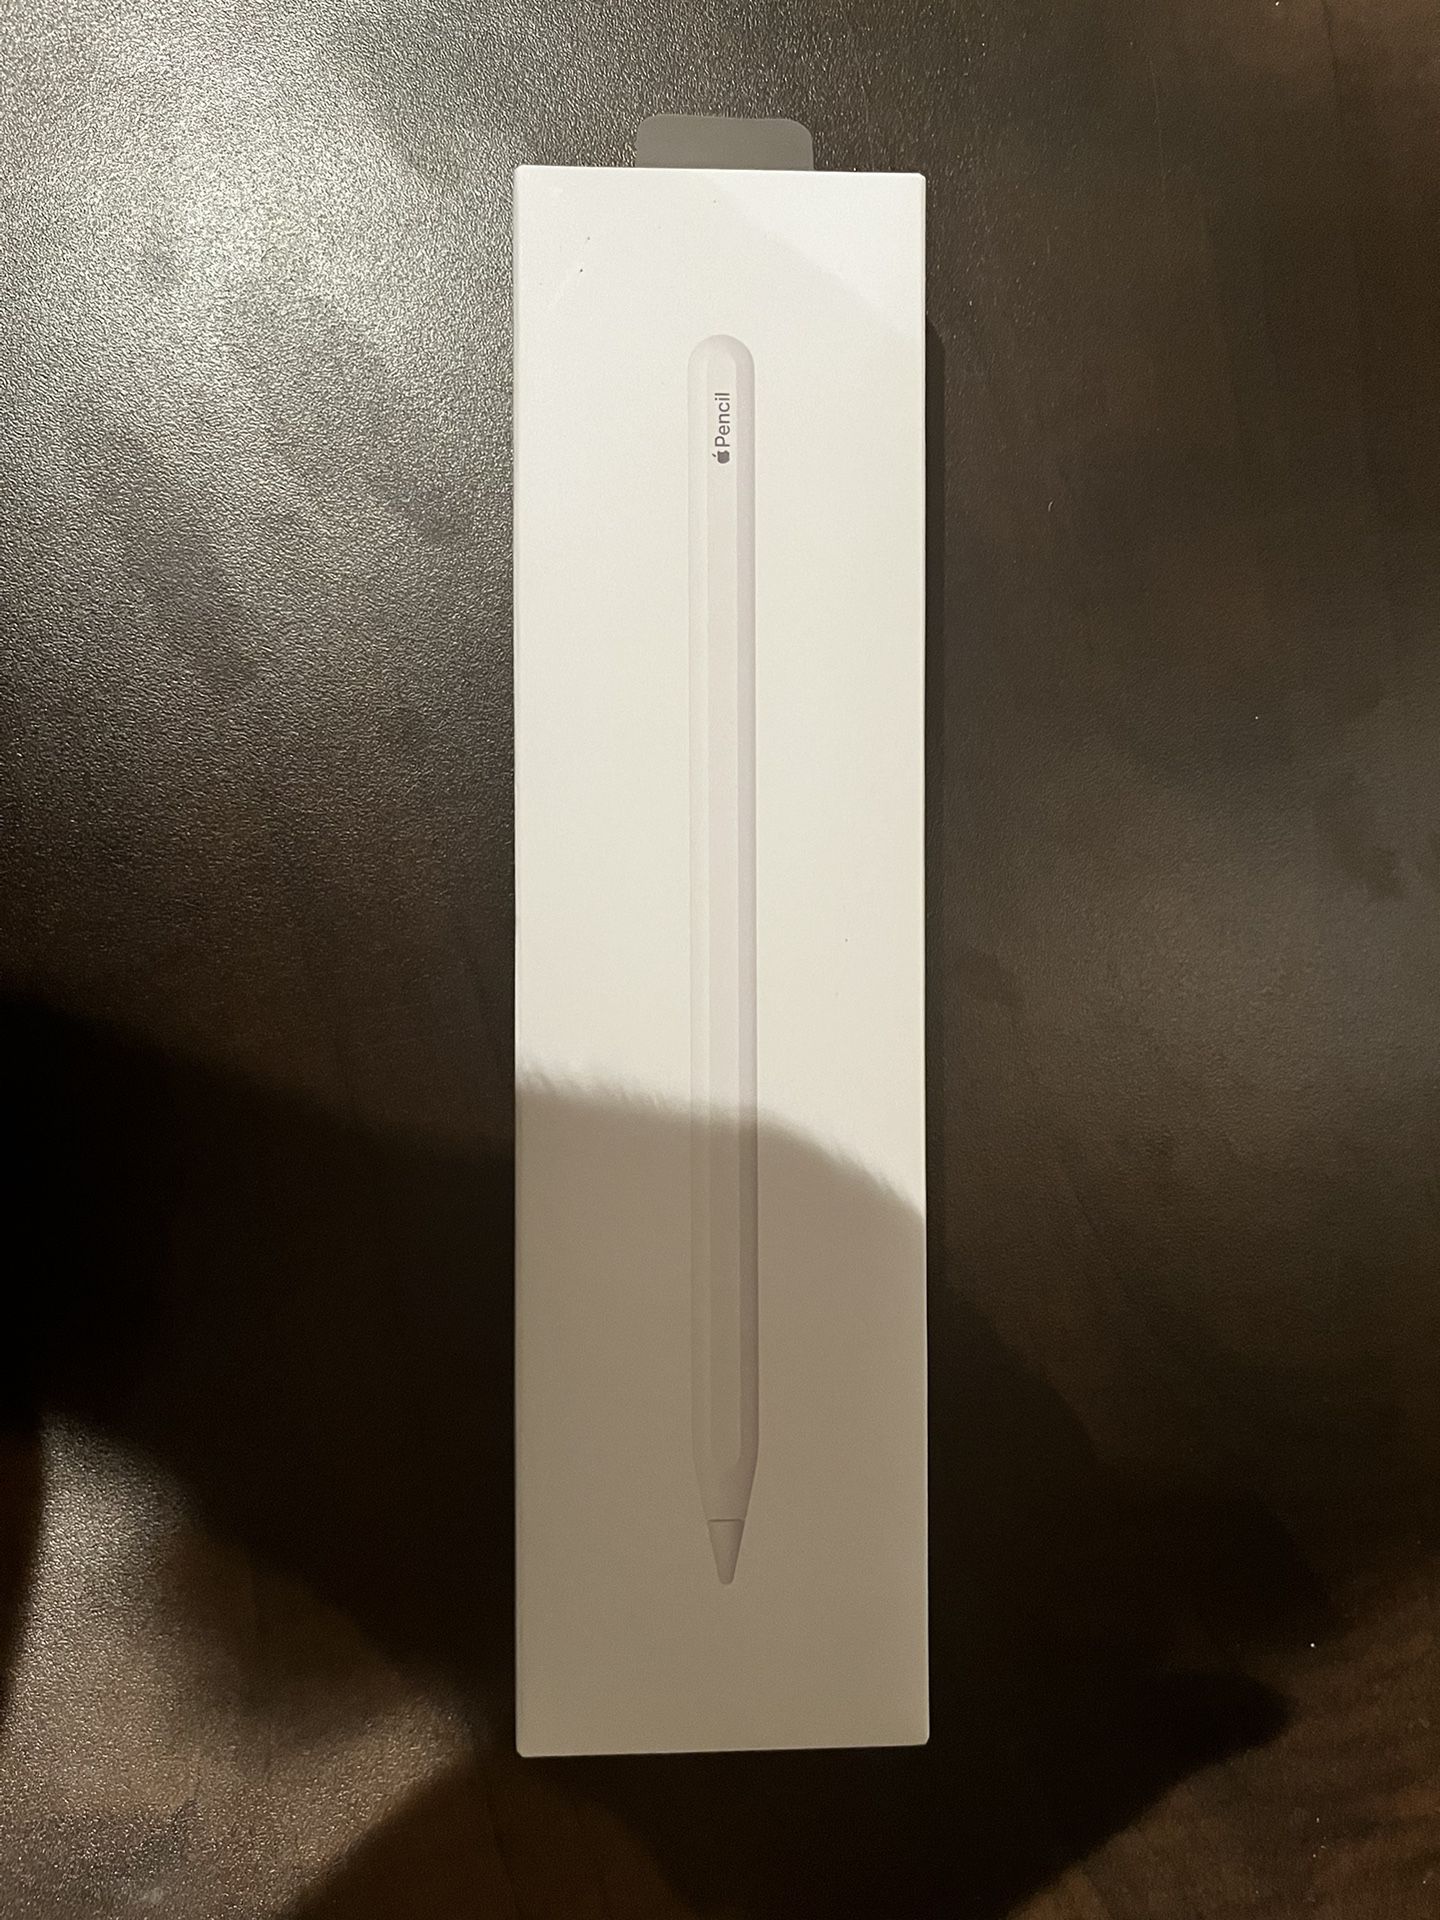 Apple Pencil (2nd Generation) For iPad Pro (Brand new and unused)